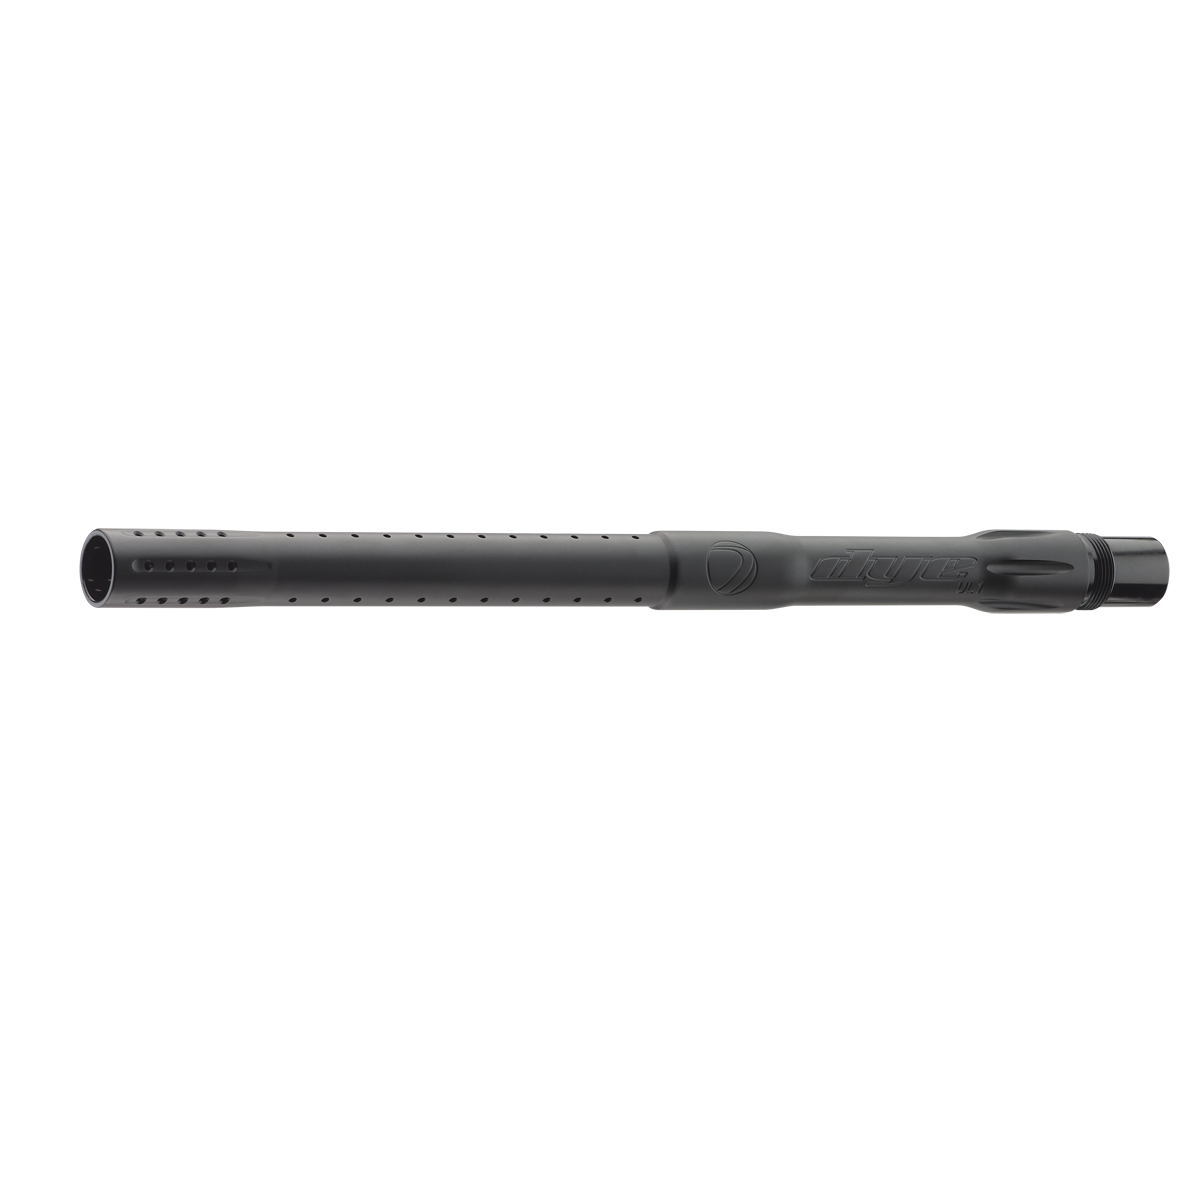 One Piece Ultralite Boomstick - Autococker (Various Sizes)